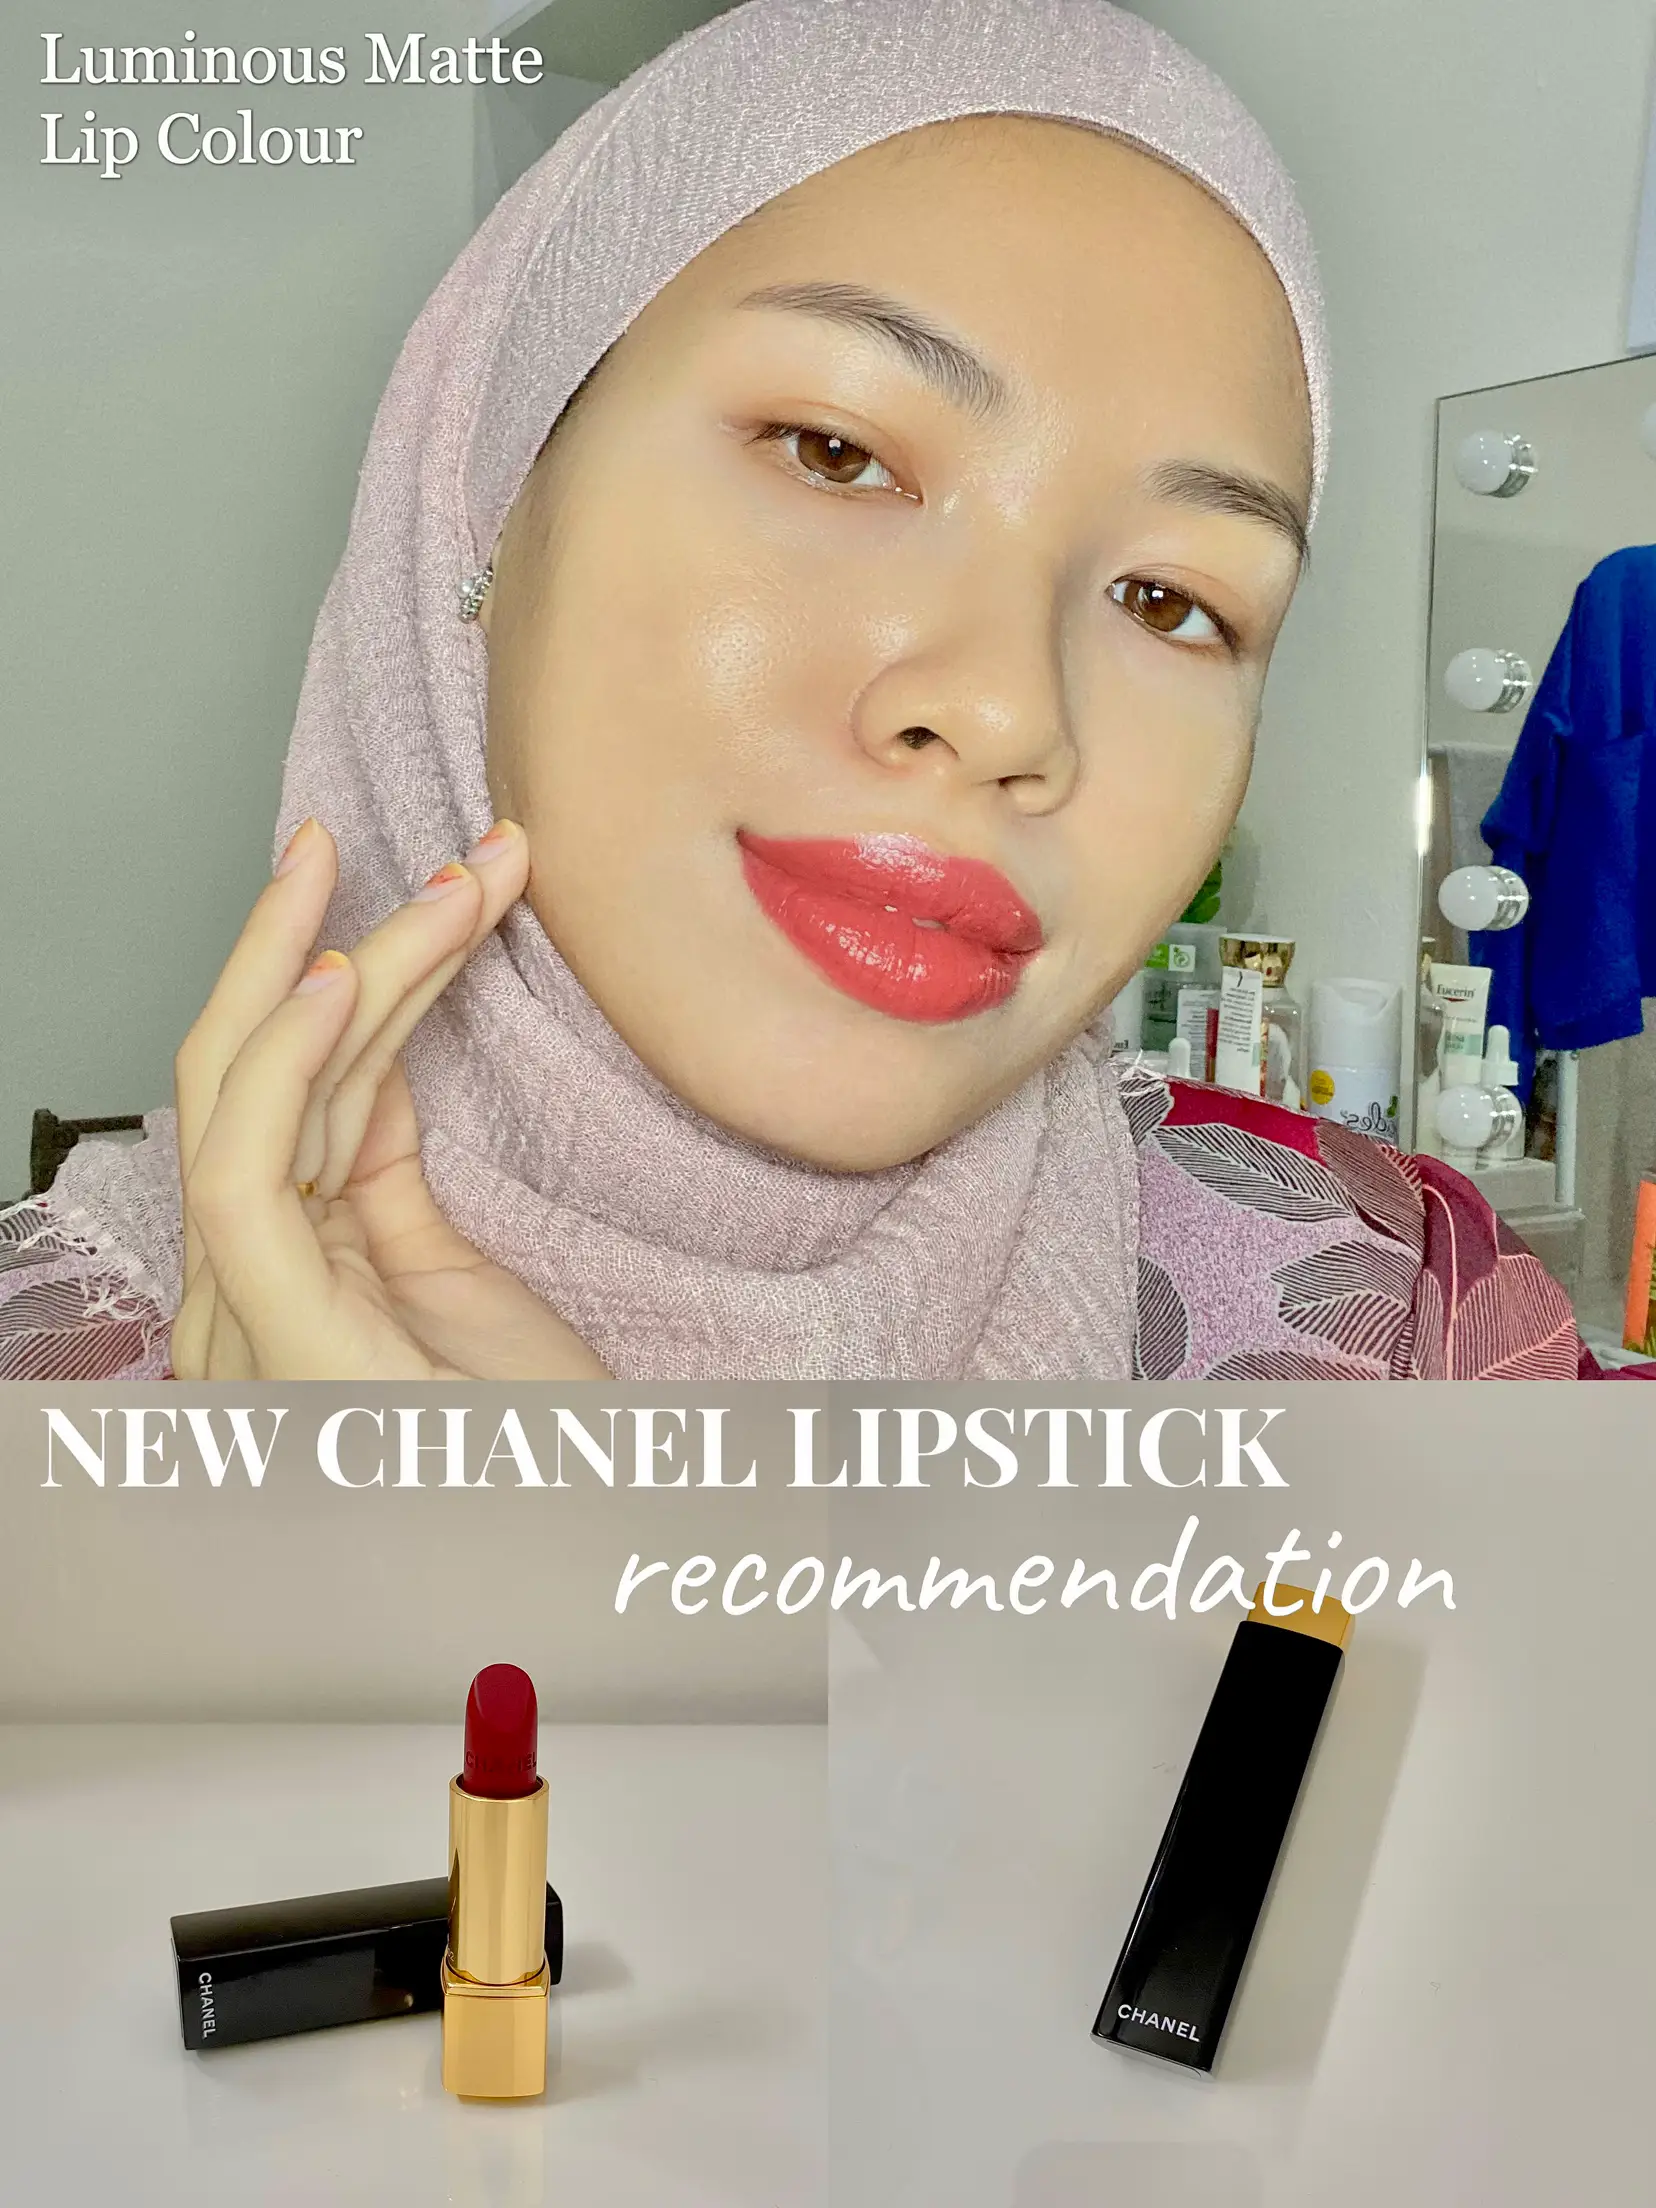 Chanel Lipstick for everyday recommendation